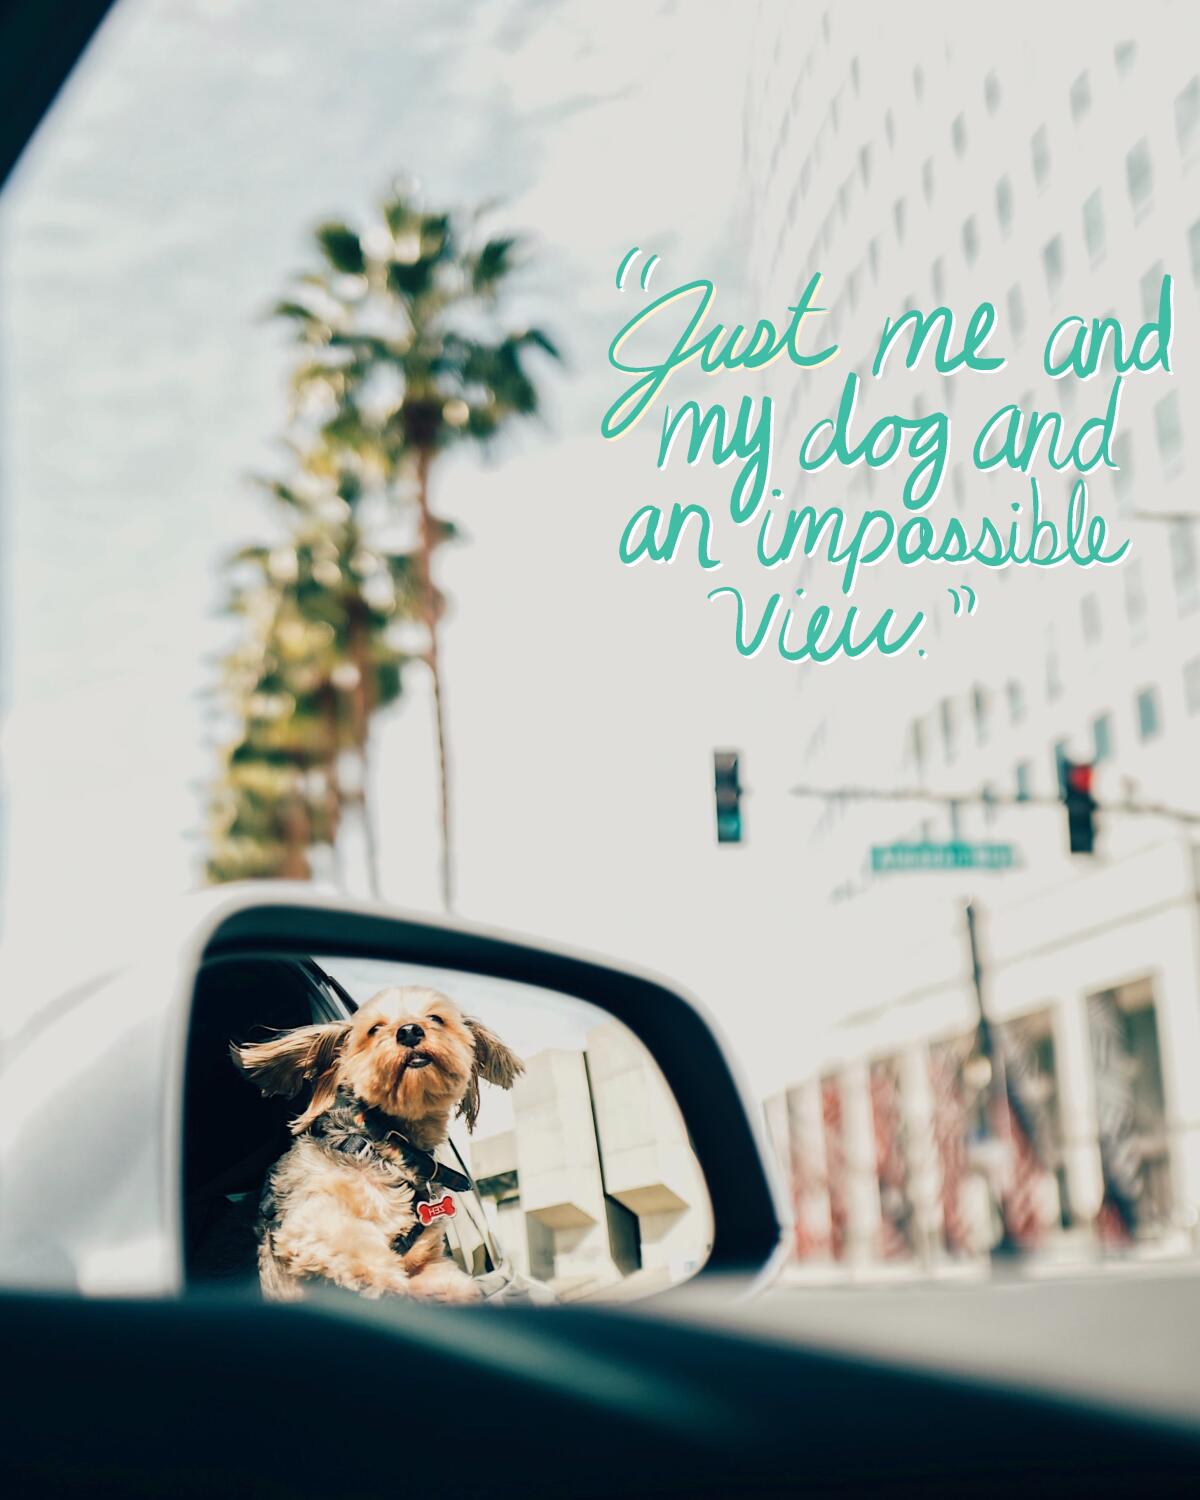 Lyrics from boygenius' “Me & My Dog” paired with photo of dog in a car.